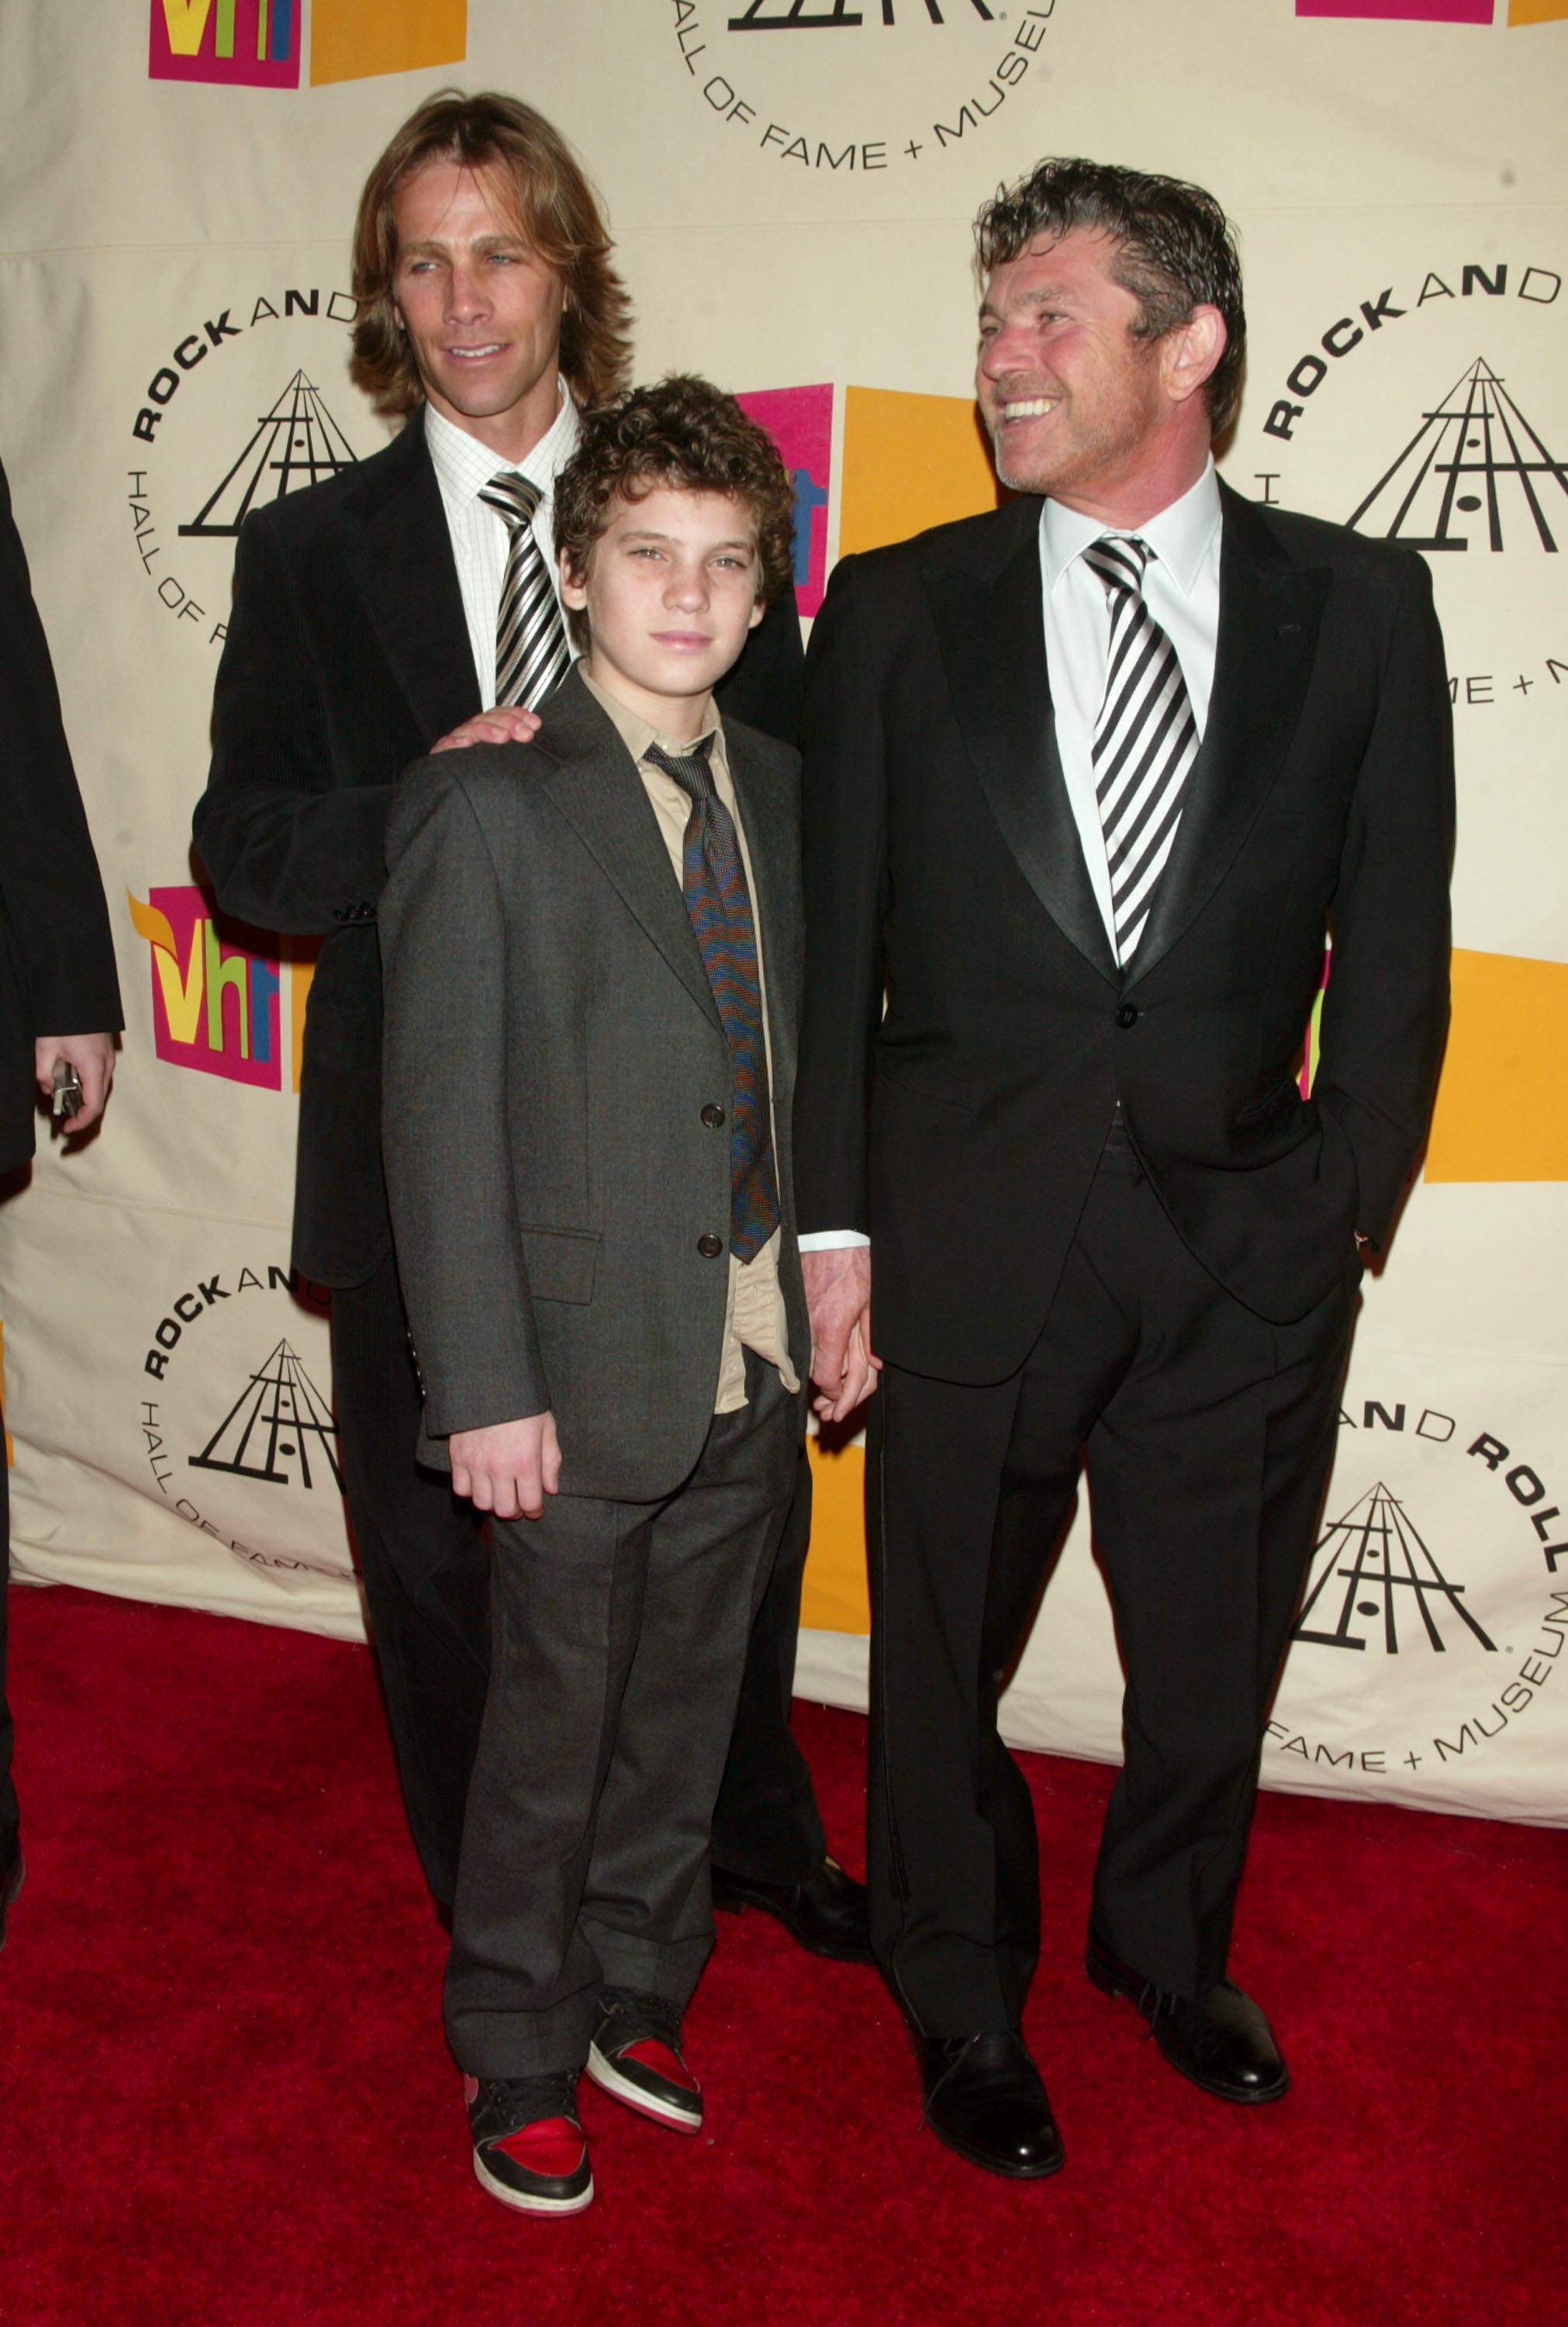 Matt Nye, Jann Wenner and son at Waldorf Astoria in New York City on March 15, 2004. | Source: Getty Images